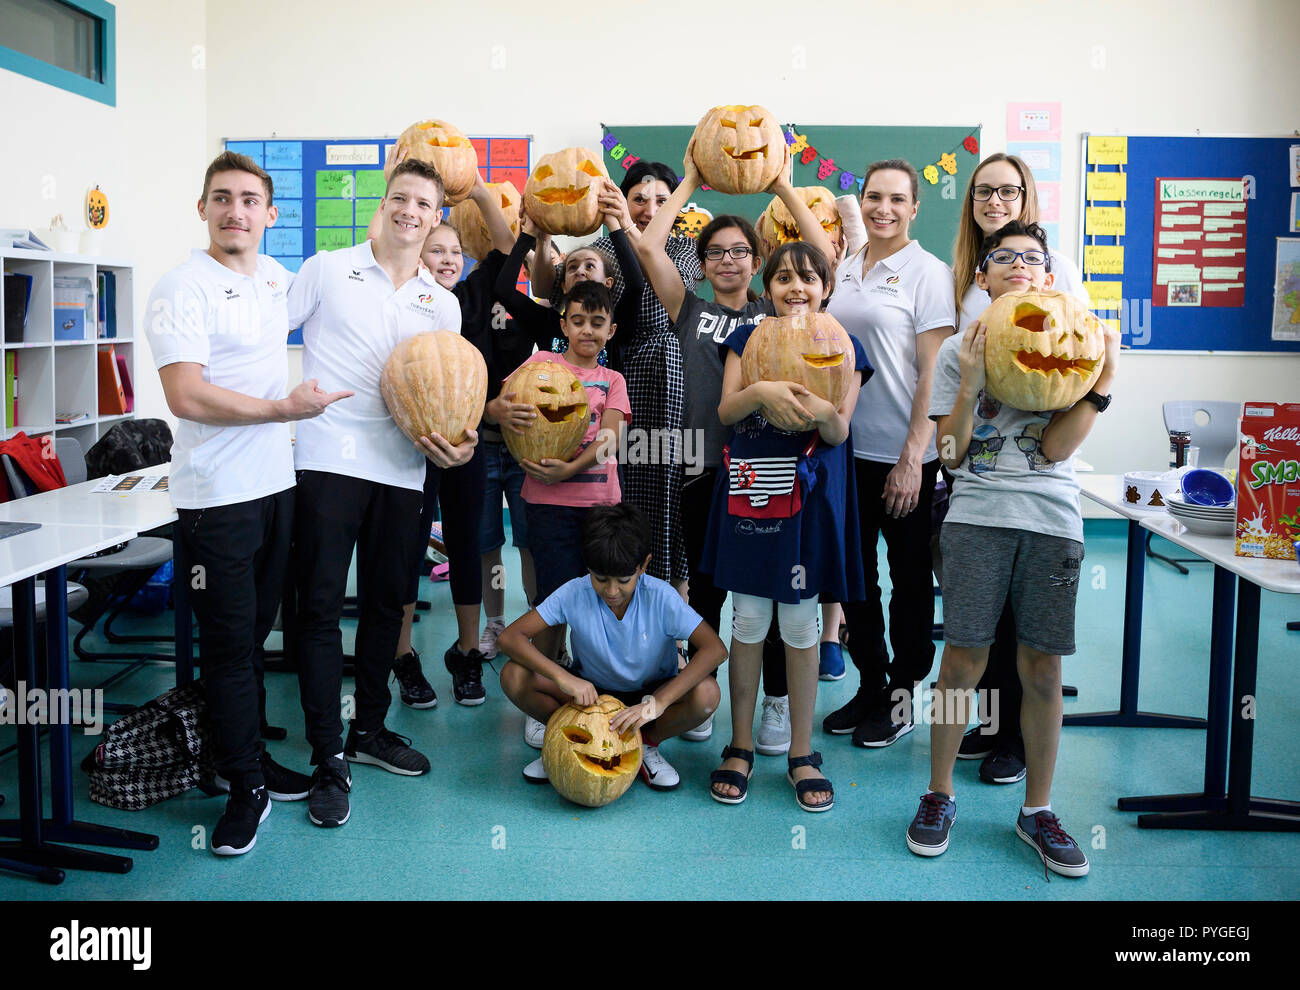 Group picture with pumpkin heads. GES / Gymnastics / Gymnastics World Championships in Doha, Visit Turnteam Germany in the German School Doha, 28.10.2018 - GES / Artistic Gymnastics / Gymnastics World Championships: 28.10.2018 - | usage worldwide Stock Photo